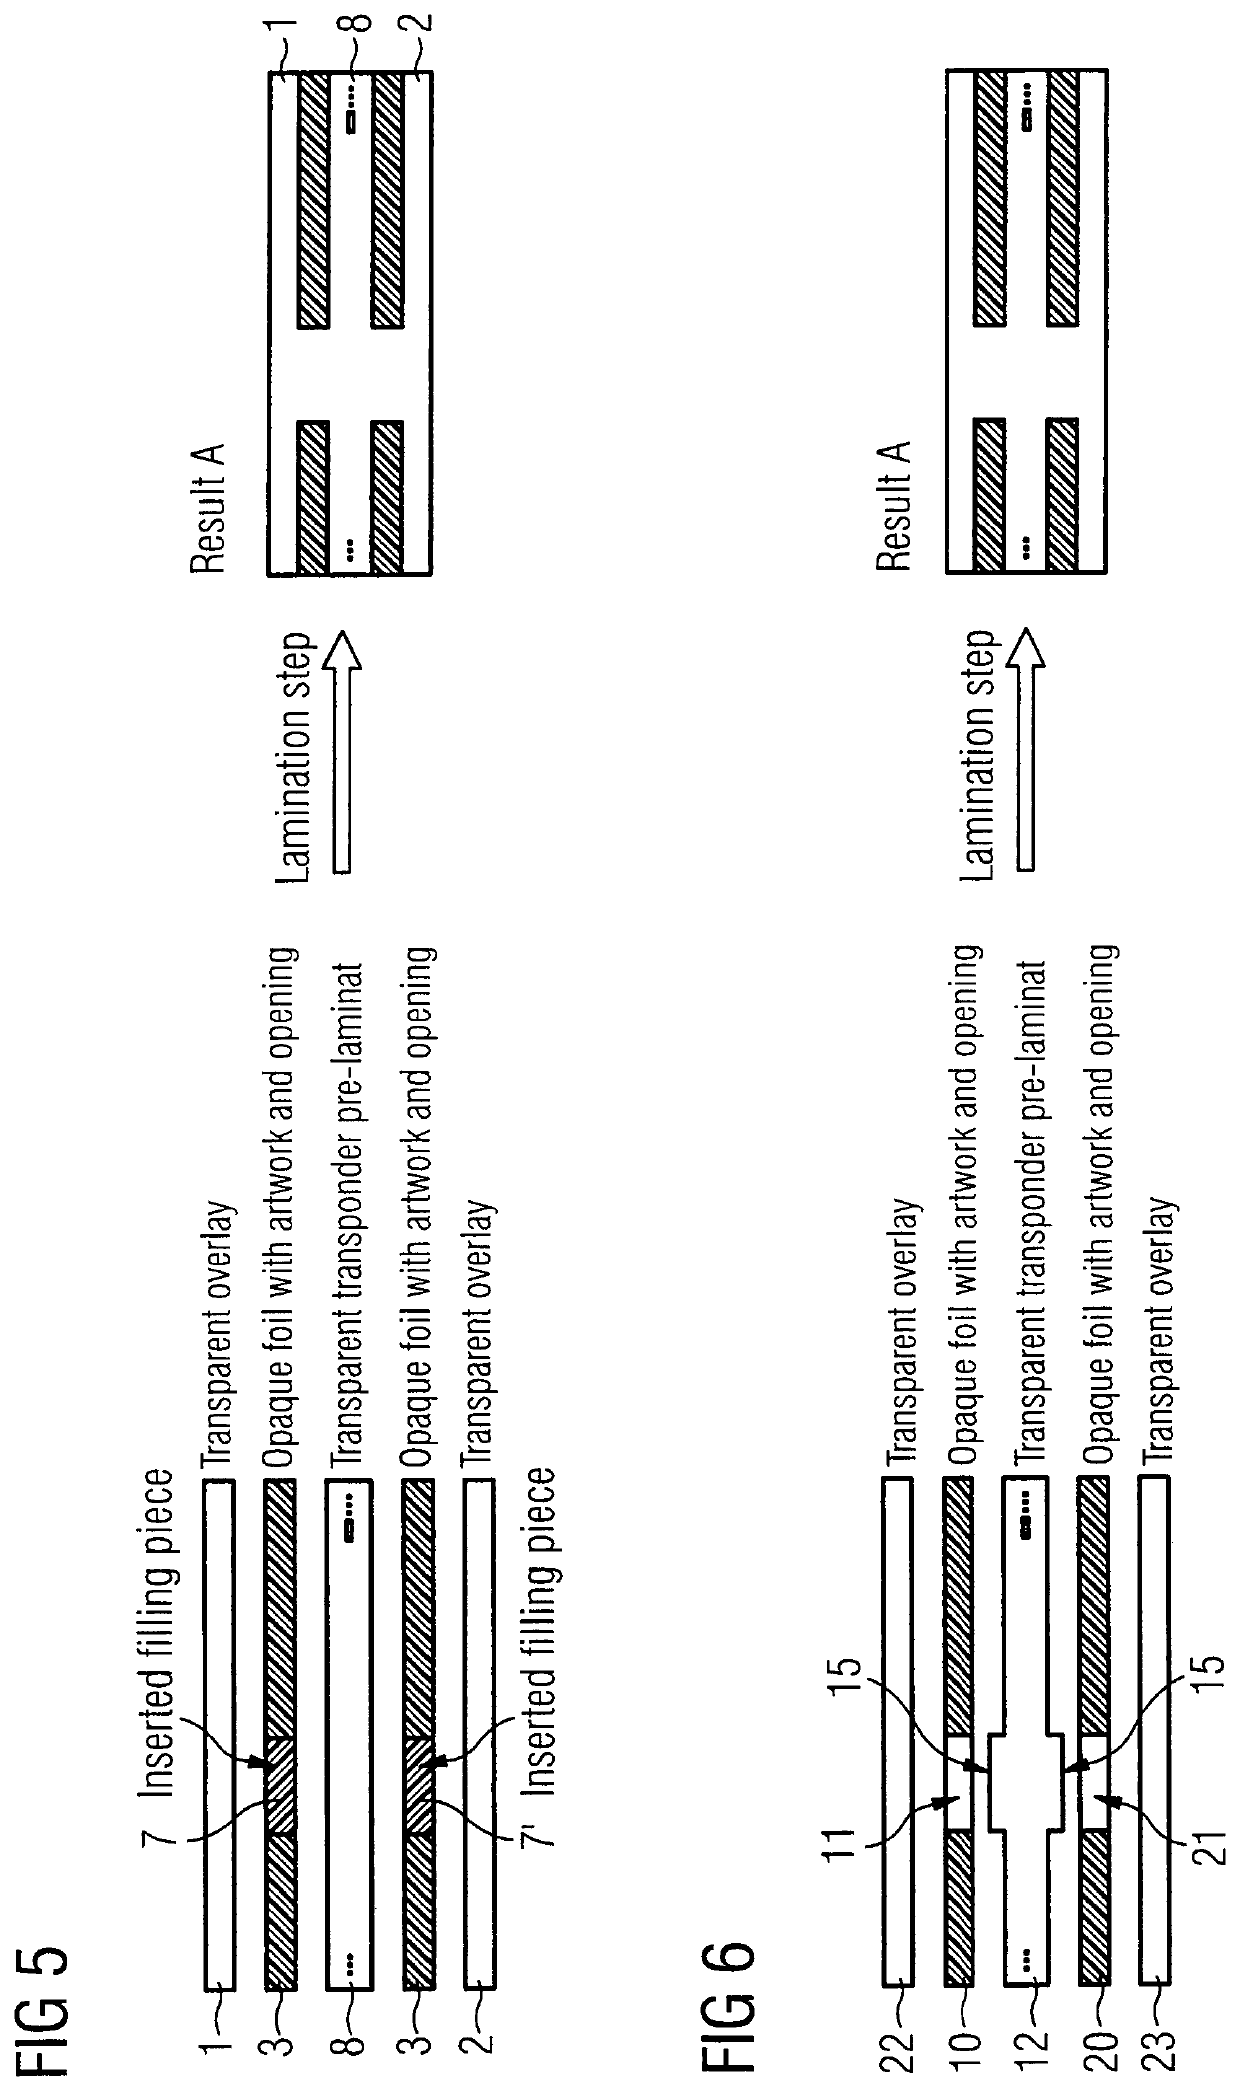 Method of manufacturing cards with a transparent window